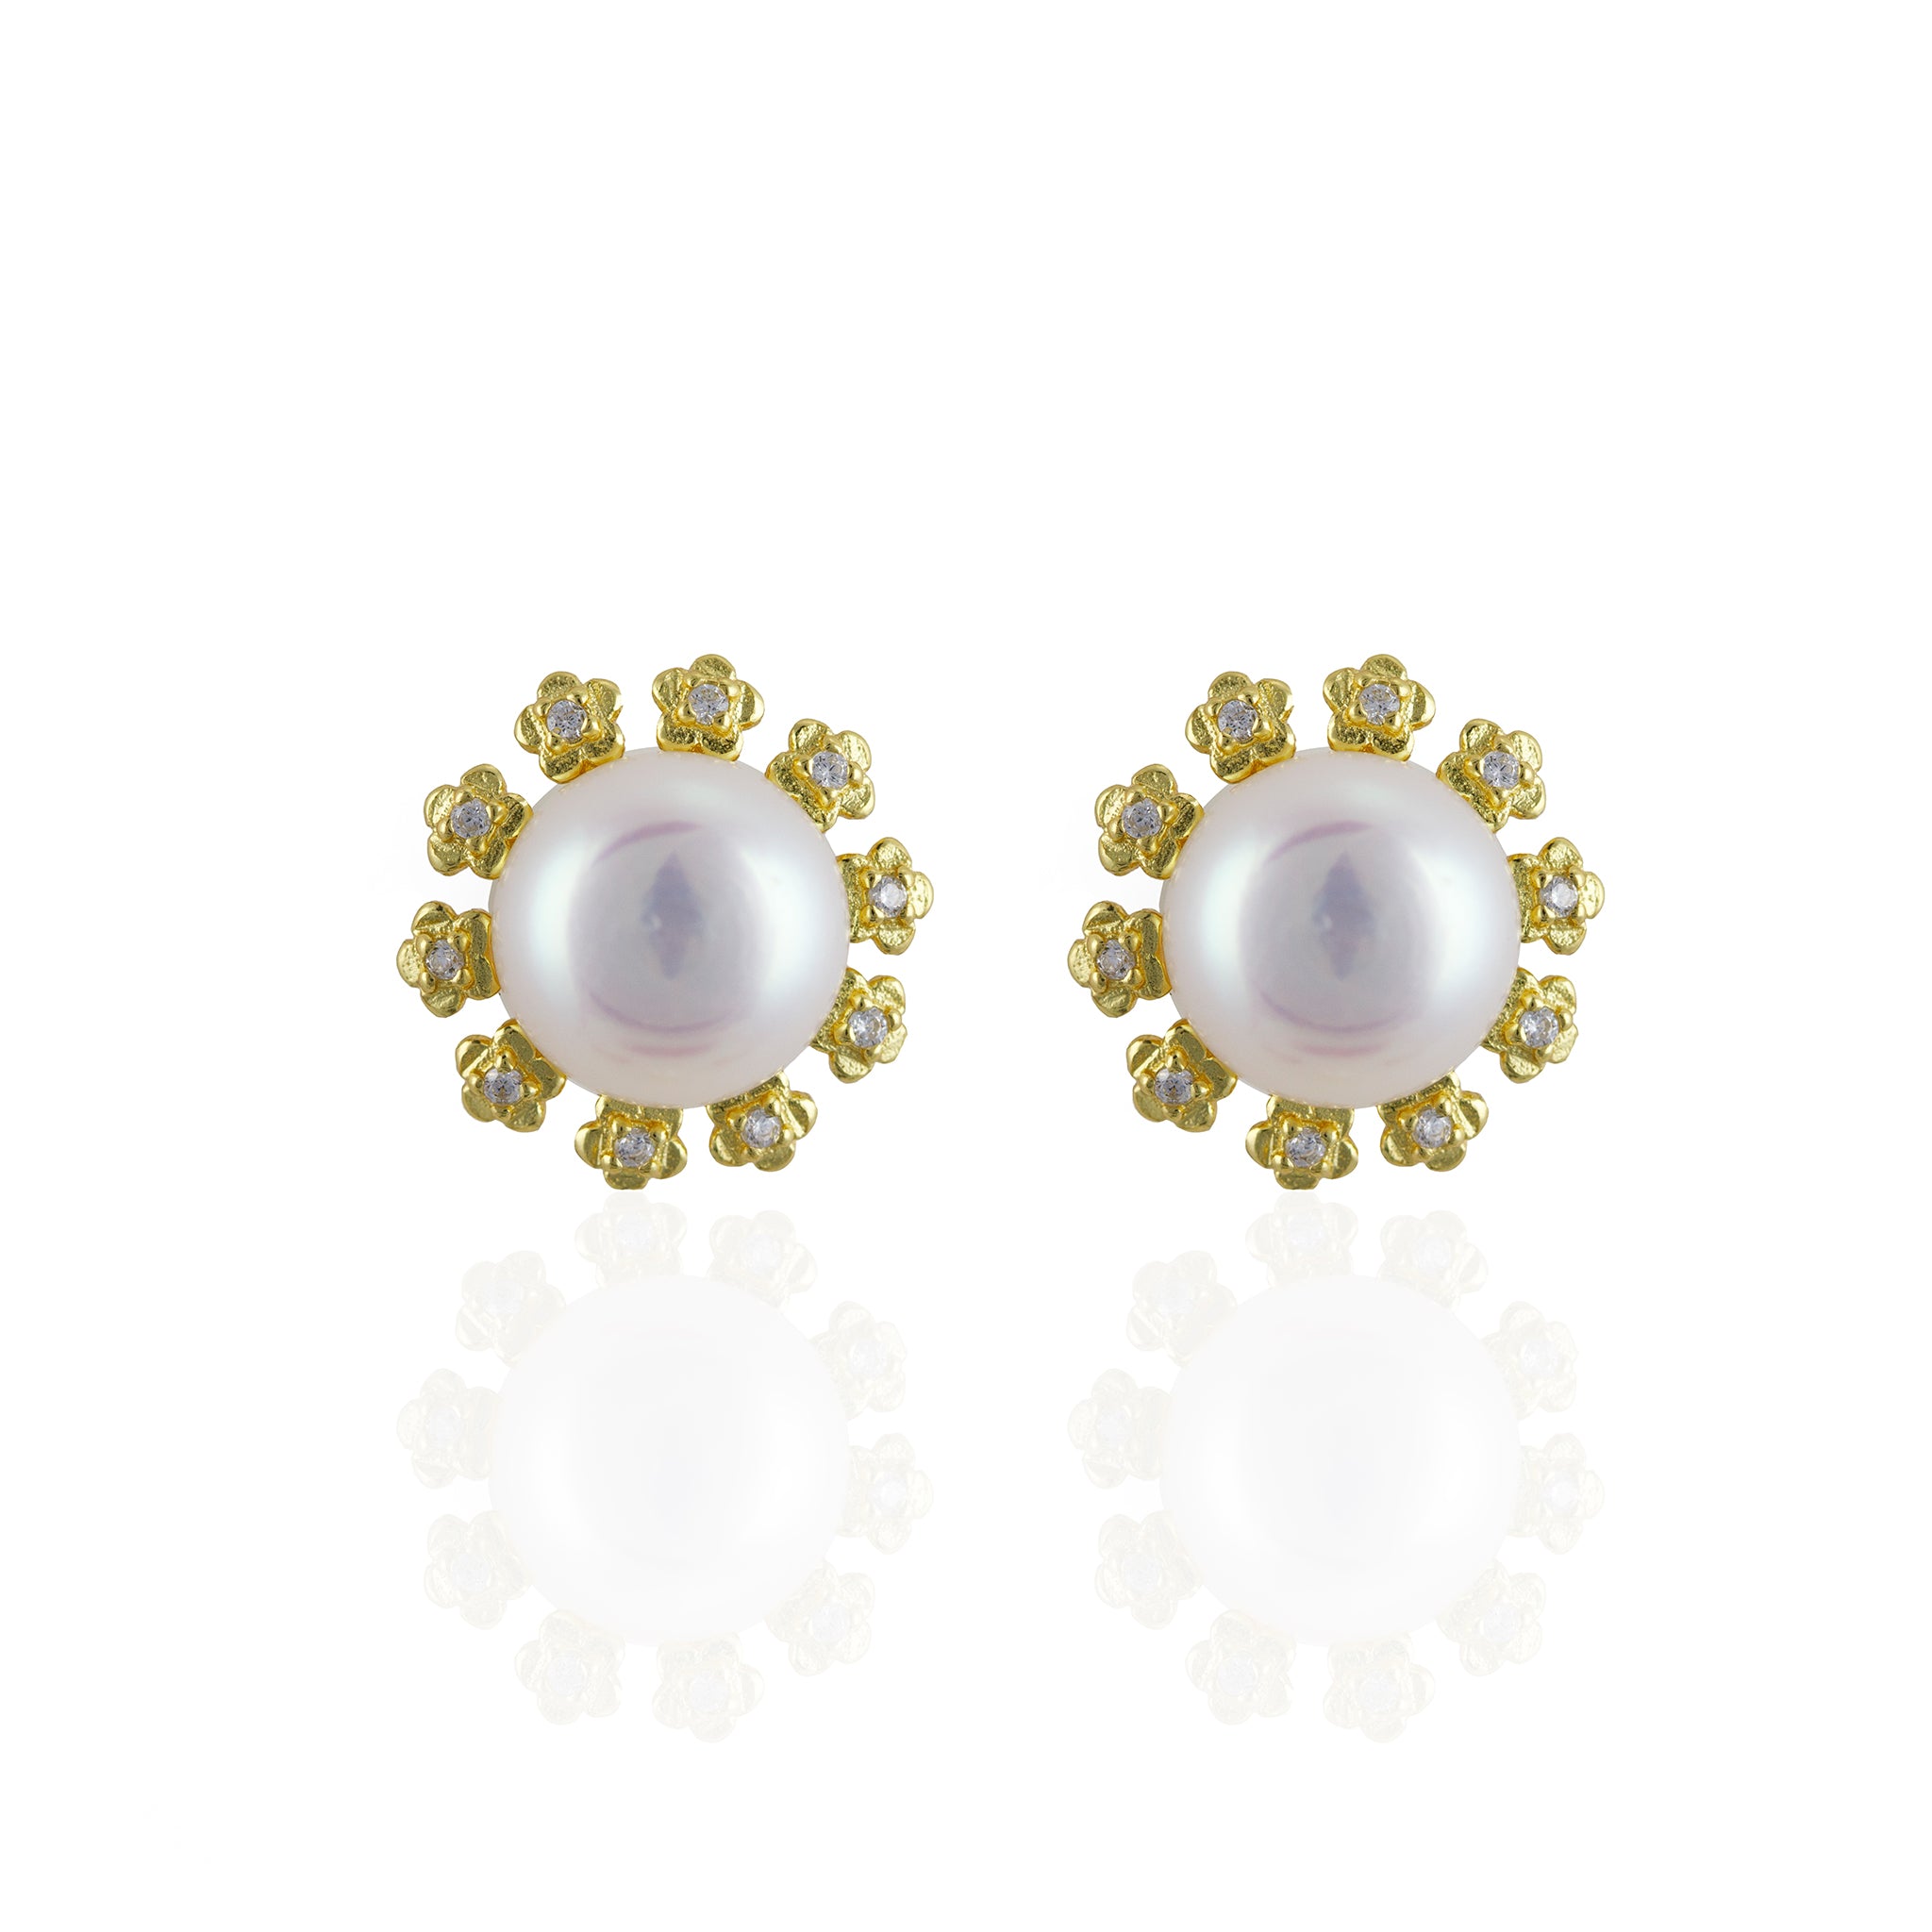 Freshwater Pearl Stud Earrings with Gemstone Accents in 14K Gold Mounting - L'Amour Pearls